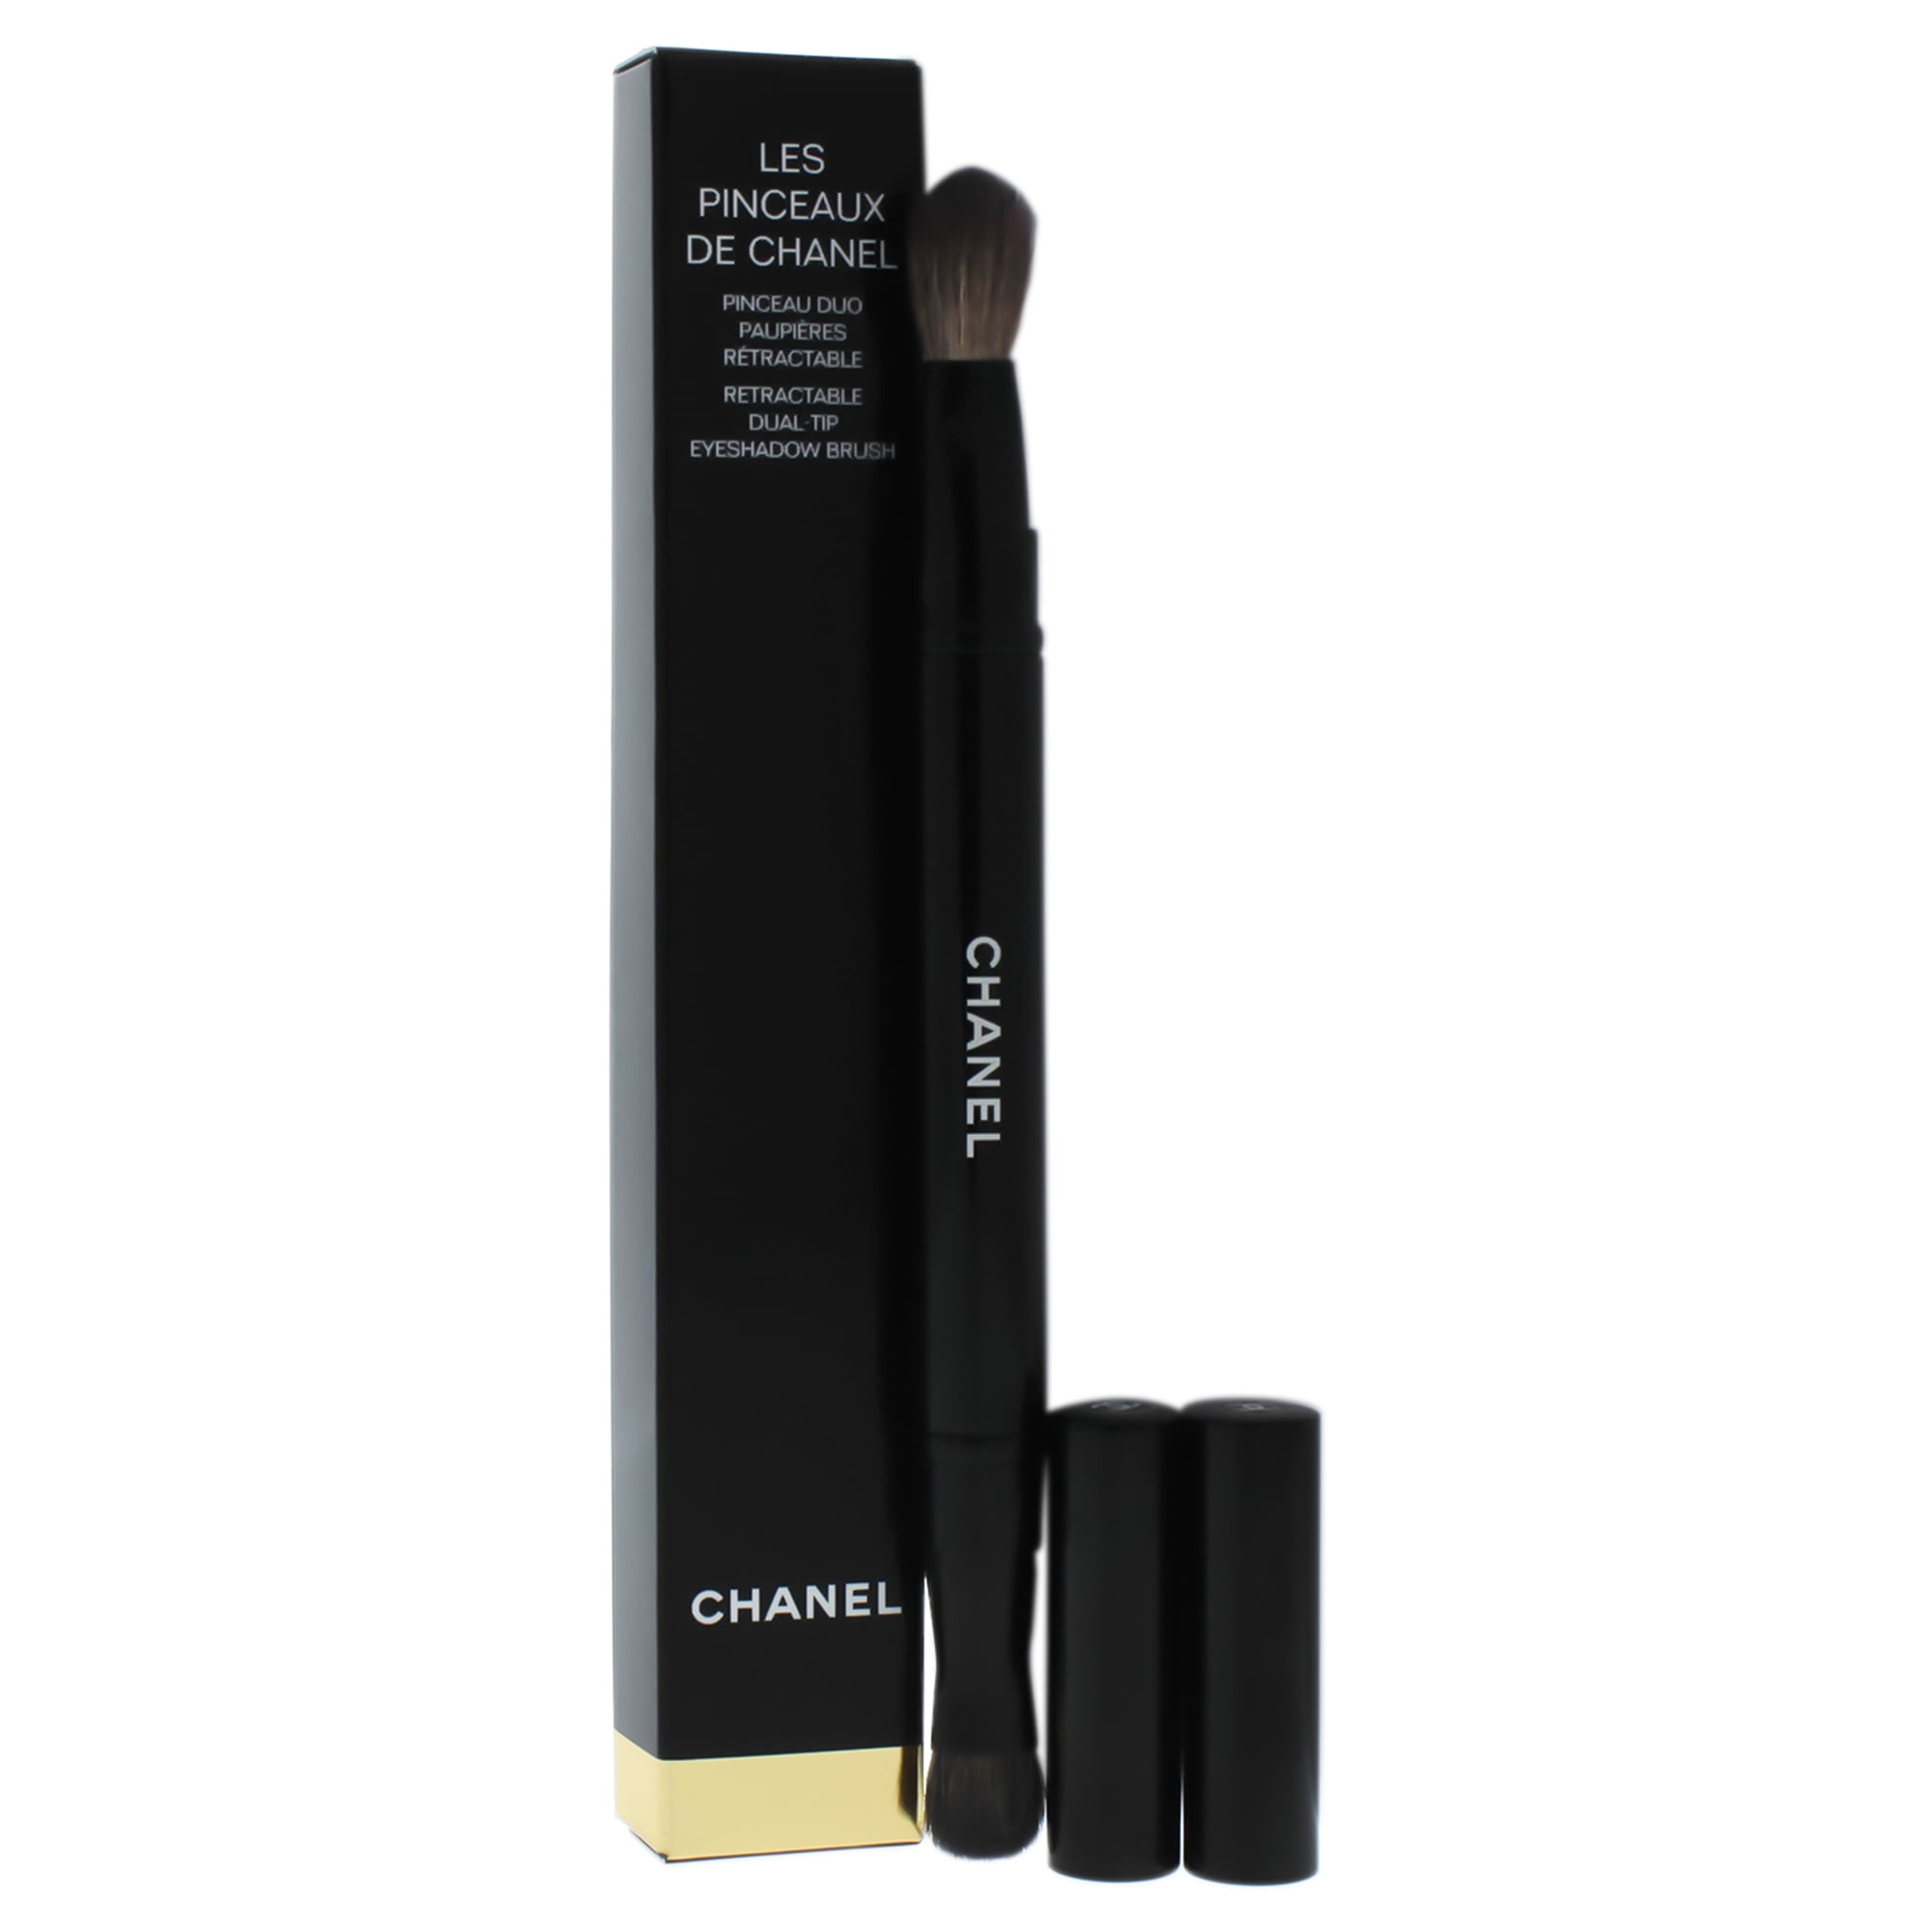 Retractable Dual-Tip Eyeshadow Brush by Chanel for Women - 1 Pc Brush